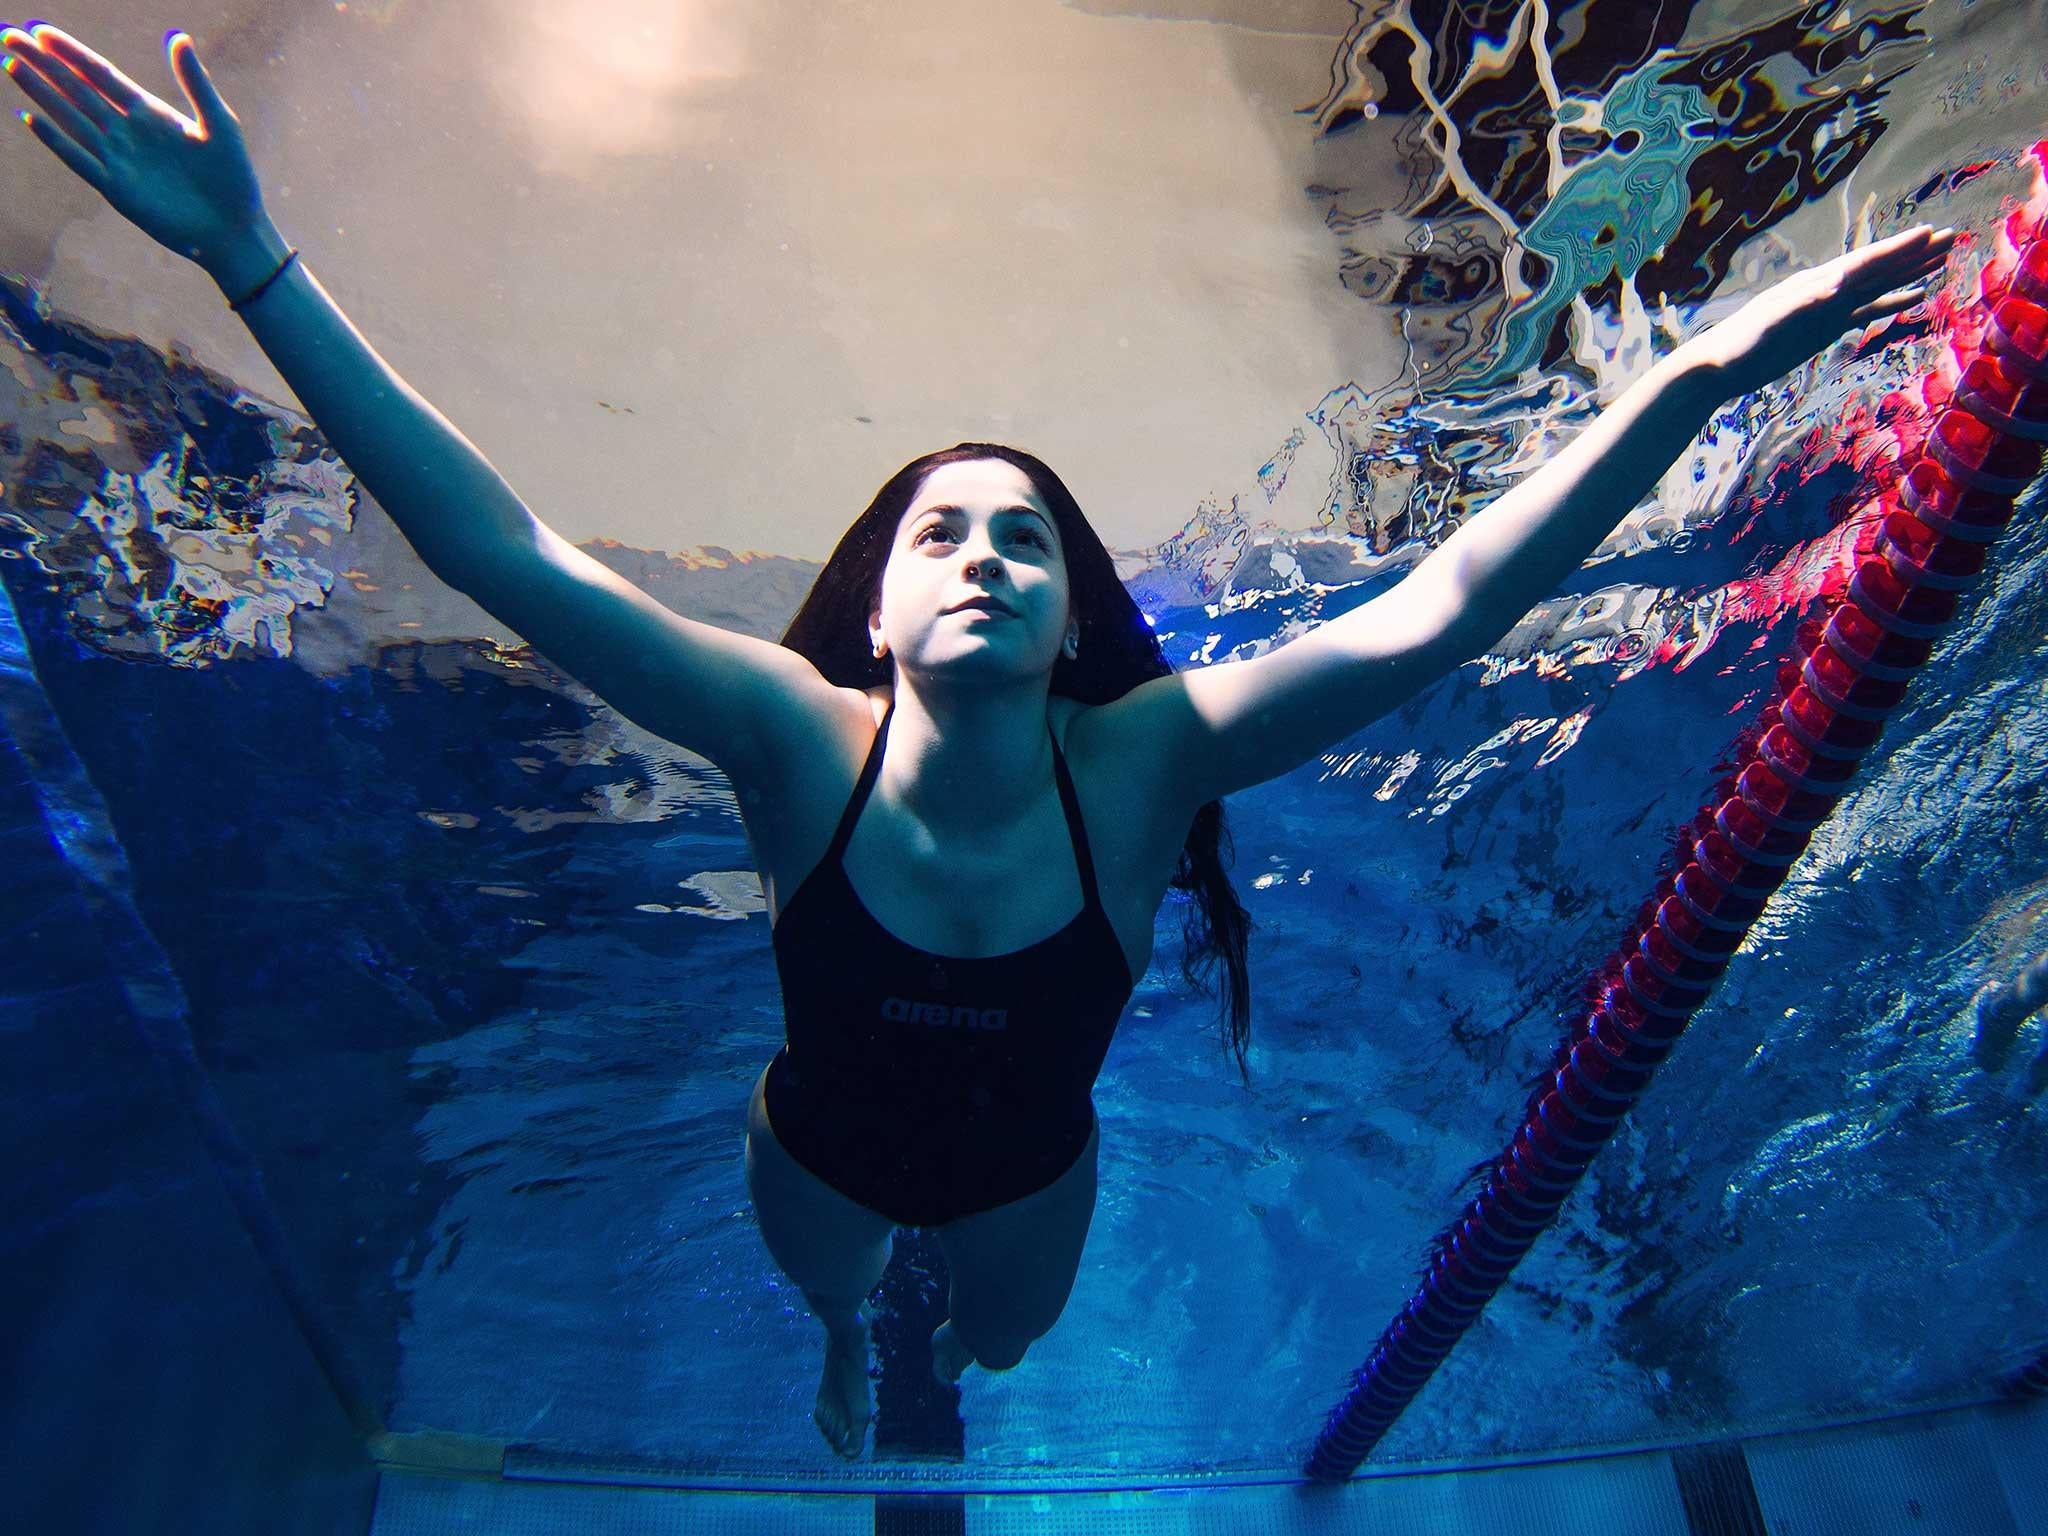 Yusra Mardini, a Syrian refugee, was one of the stories of the 2016 Olympics